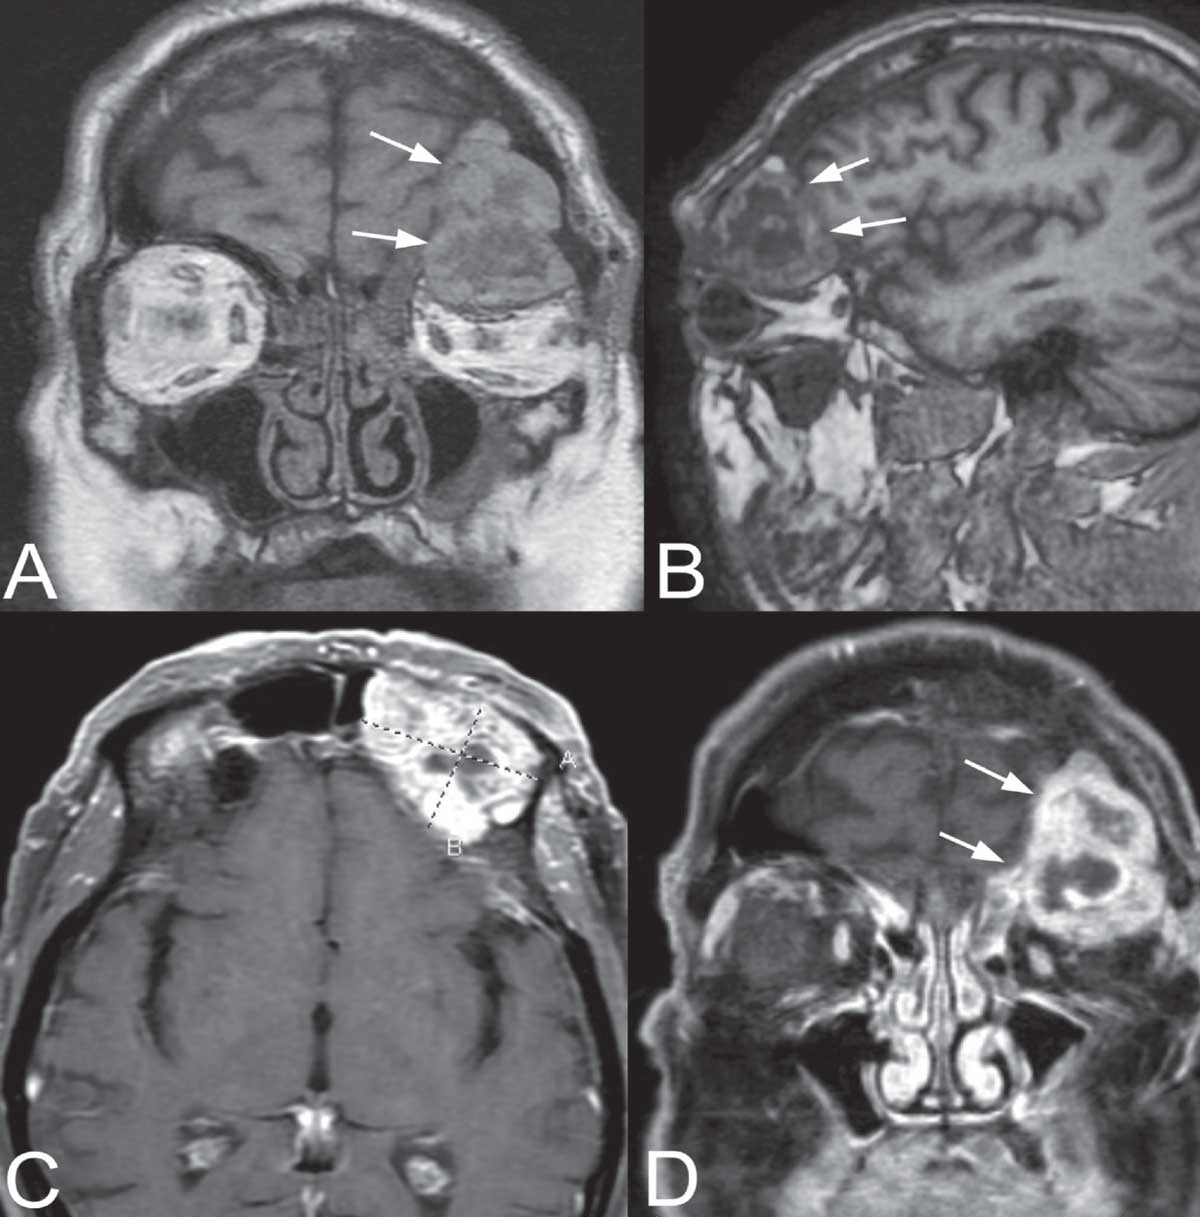 Figure 2. MR imaging. Coronal (A) and parasagittal (B) T1-weighted, pre-contrast views of the left skull base mass (arrows). Note the heterogenous signal within the mass. Axial (C) and coronal (D) T1-weighted, post-contrast views with fat suppression. The mass enhances with contrast, but contains multiple lucencies suggestive of degenerated or necrotic tumor.